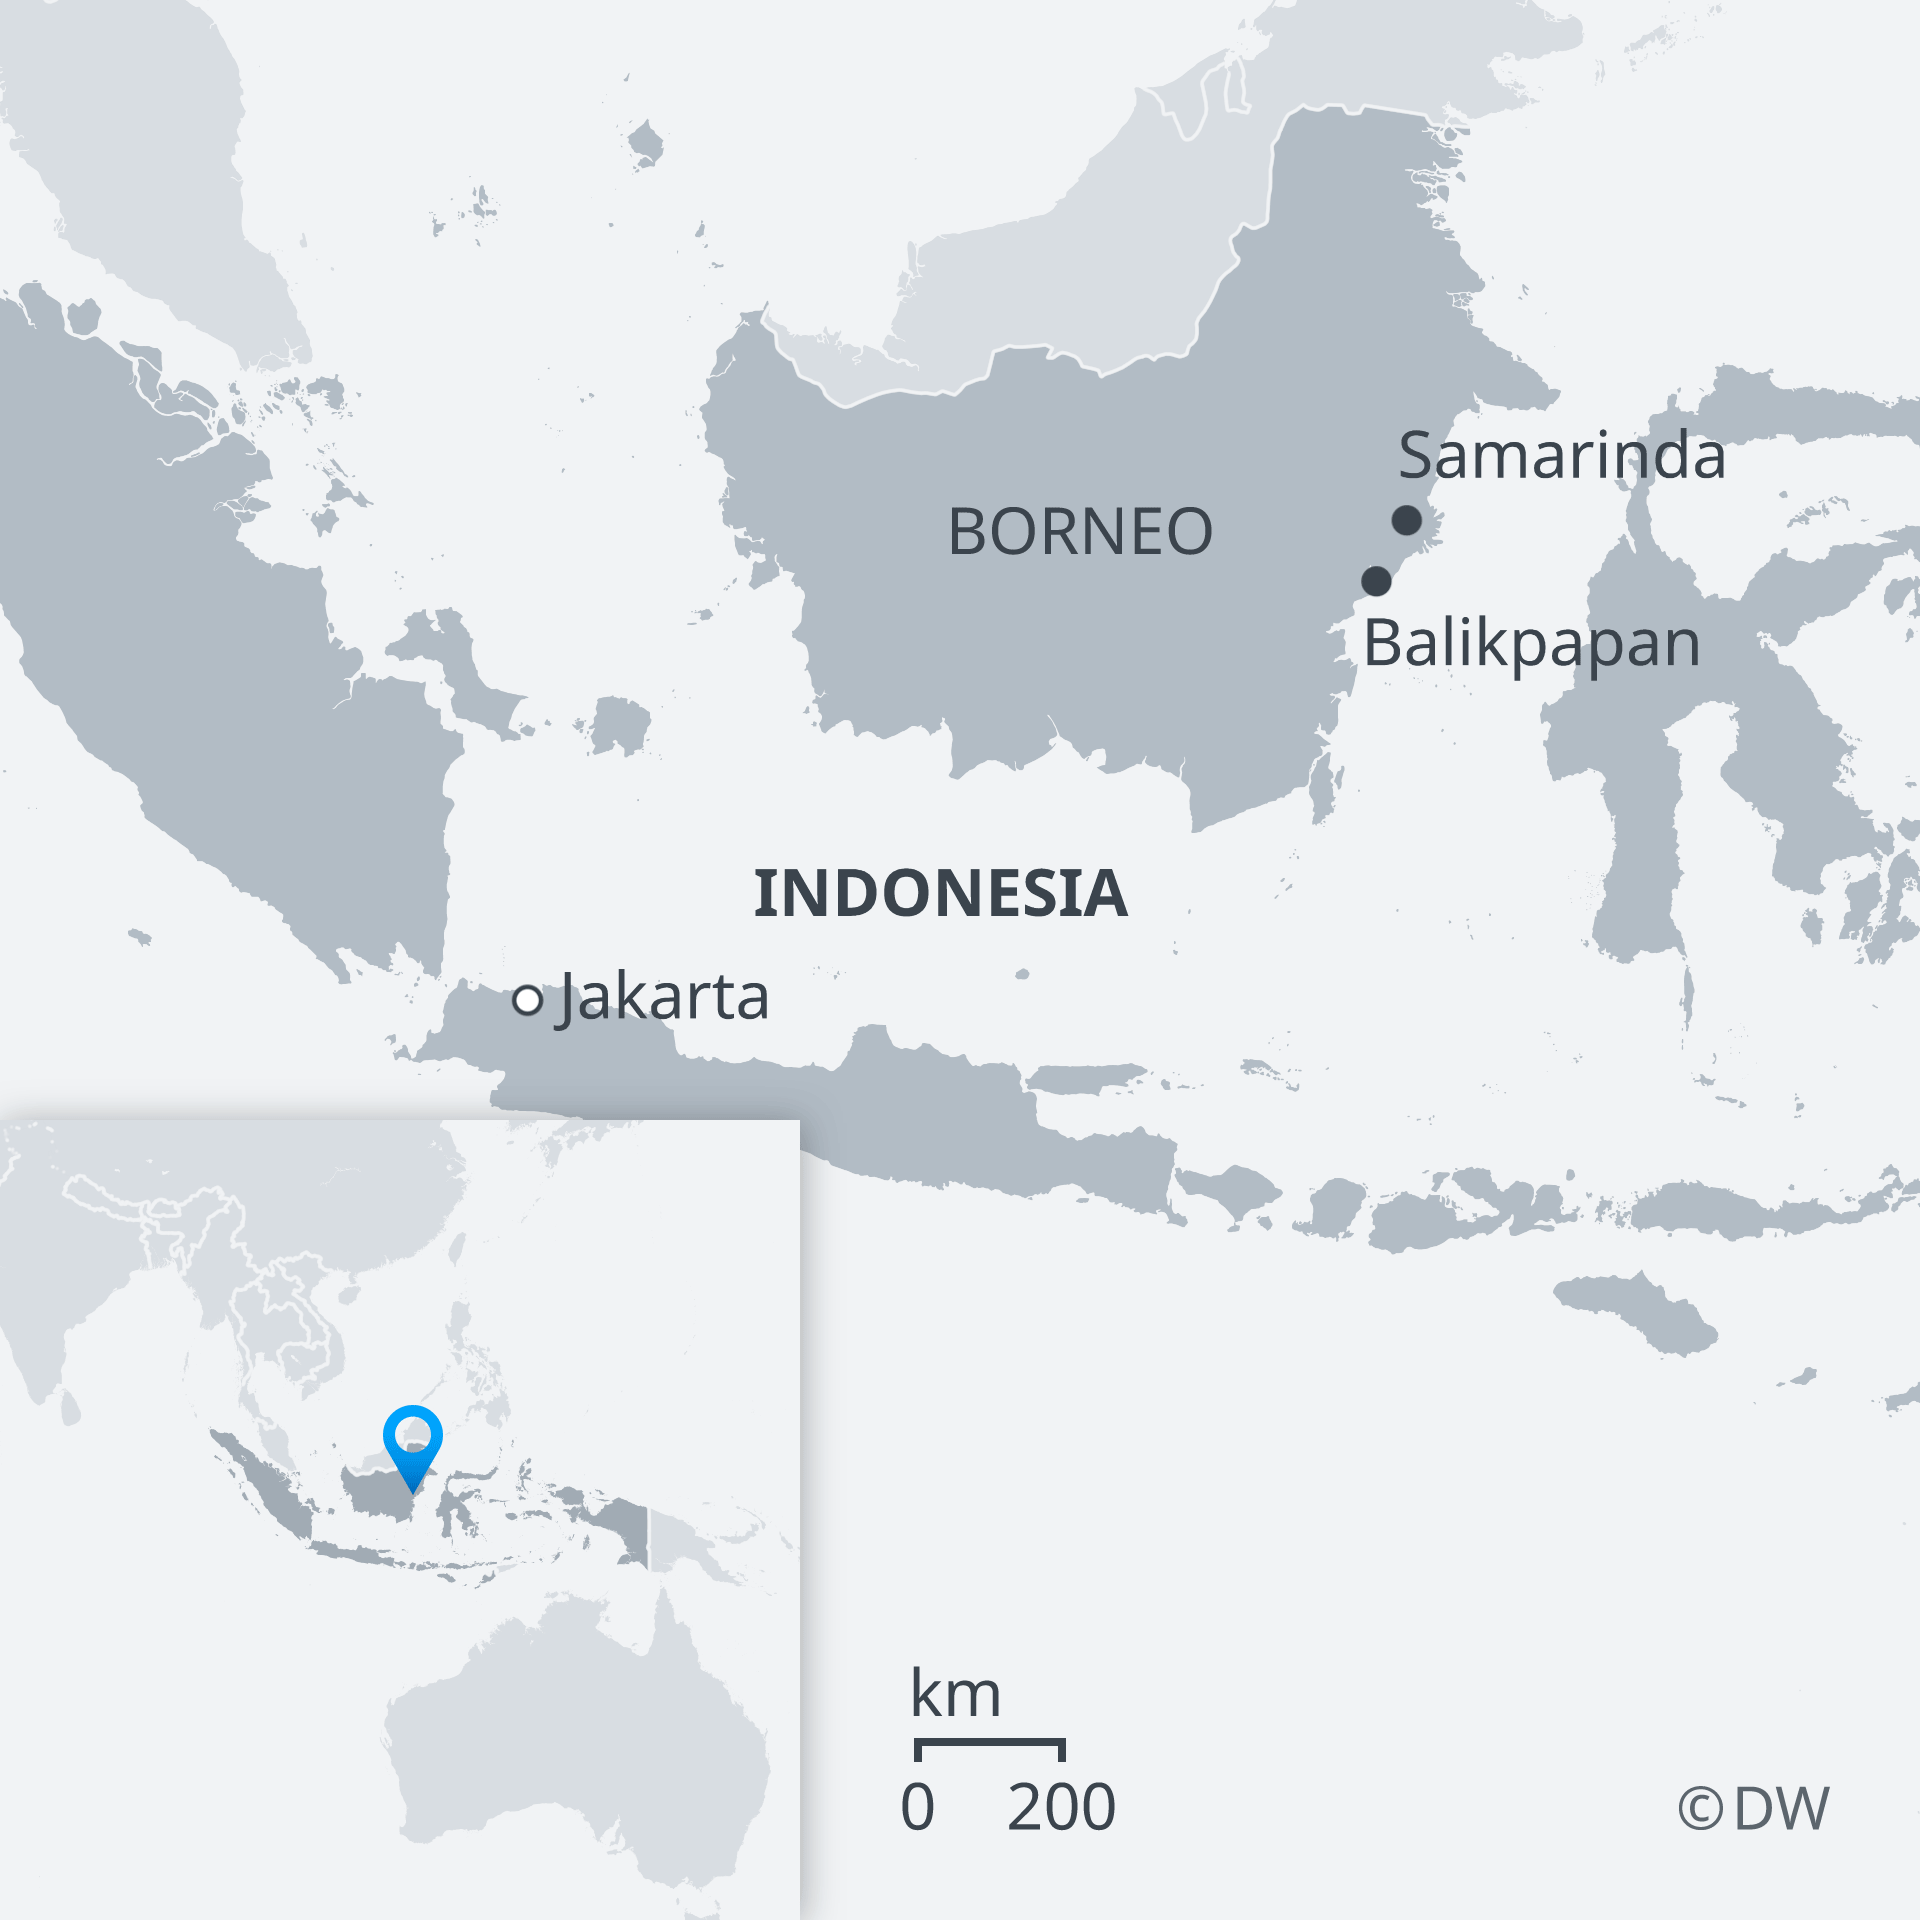 Infographic of Indonesia showing the island of Borneo, where the new capital of the archipelago nation is to be built (source: DW)